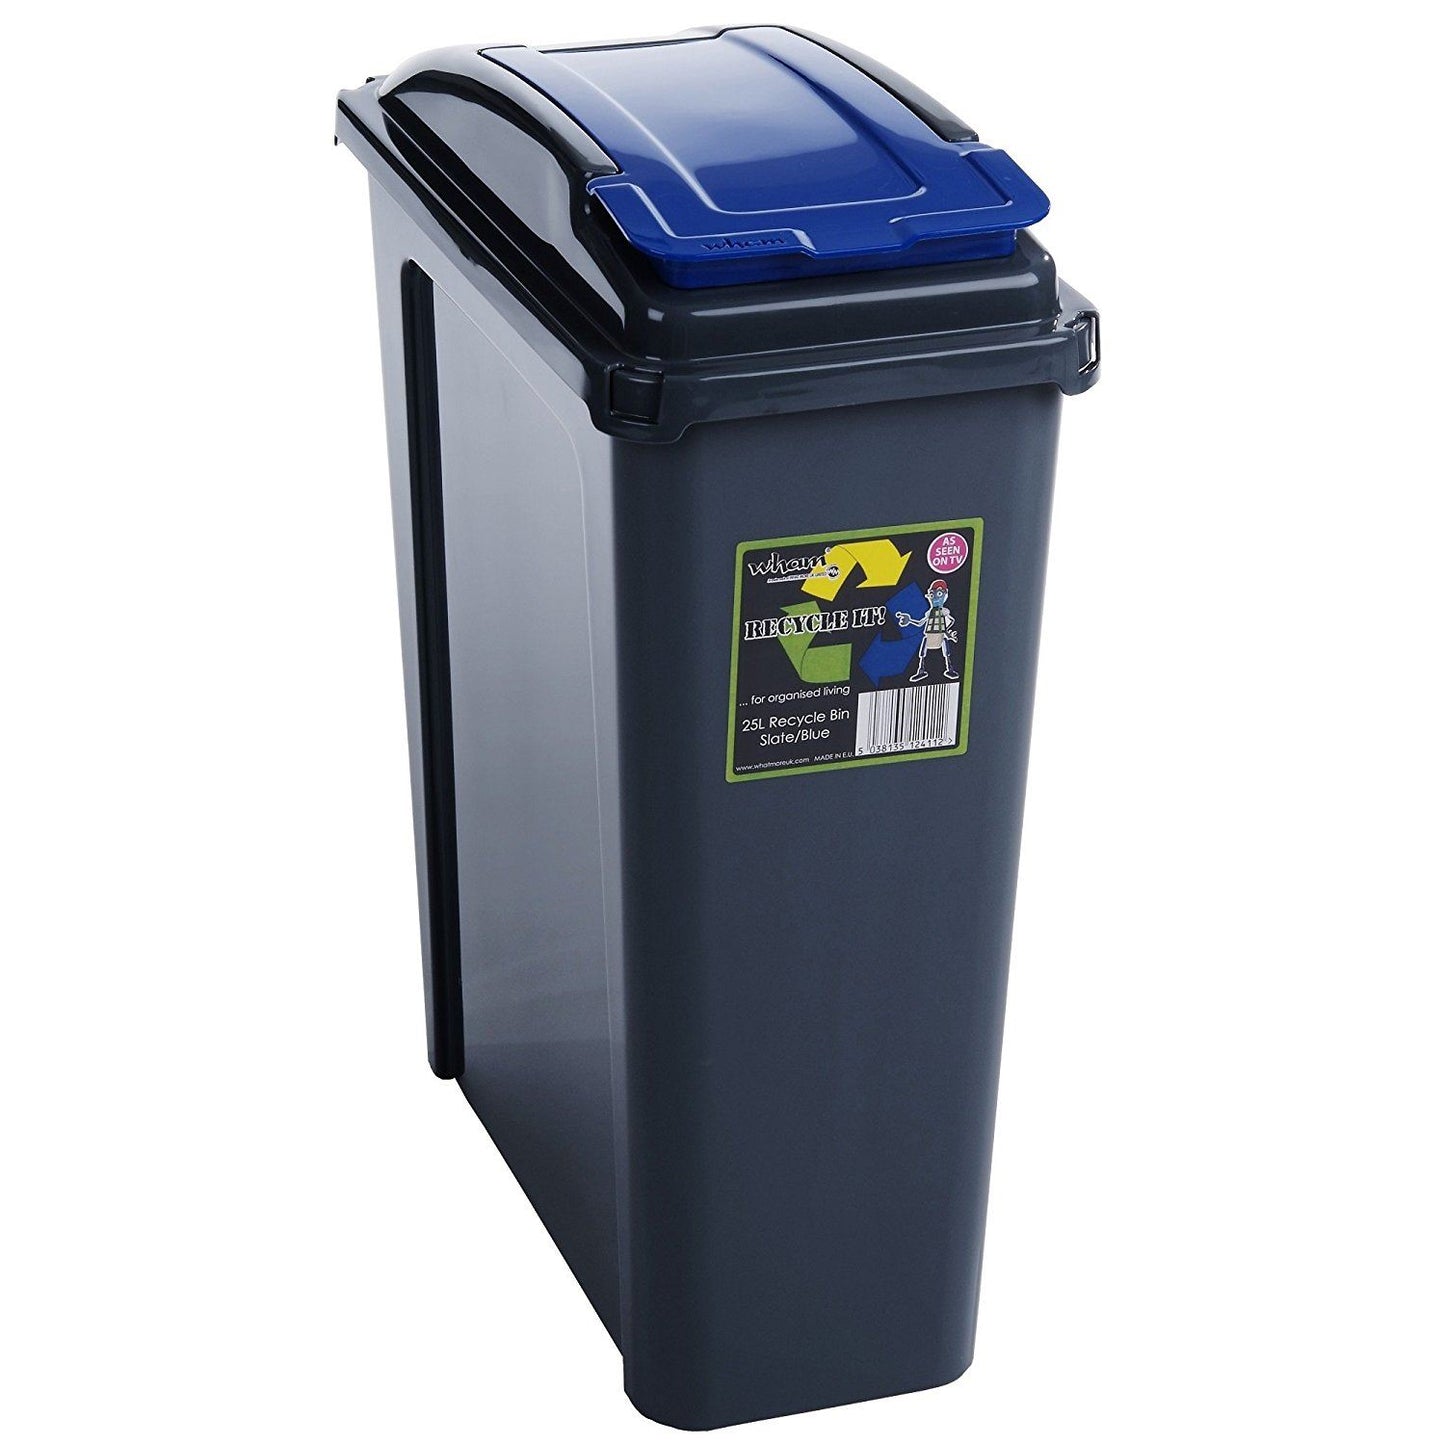 Keep Your Space Clean with a Pedal Bin